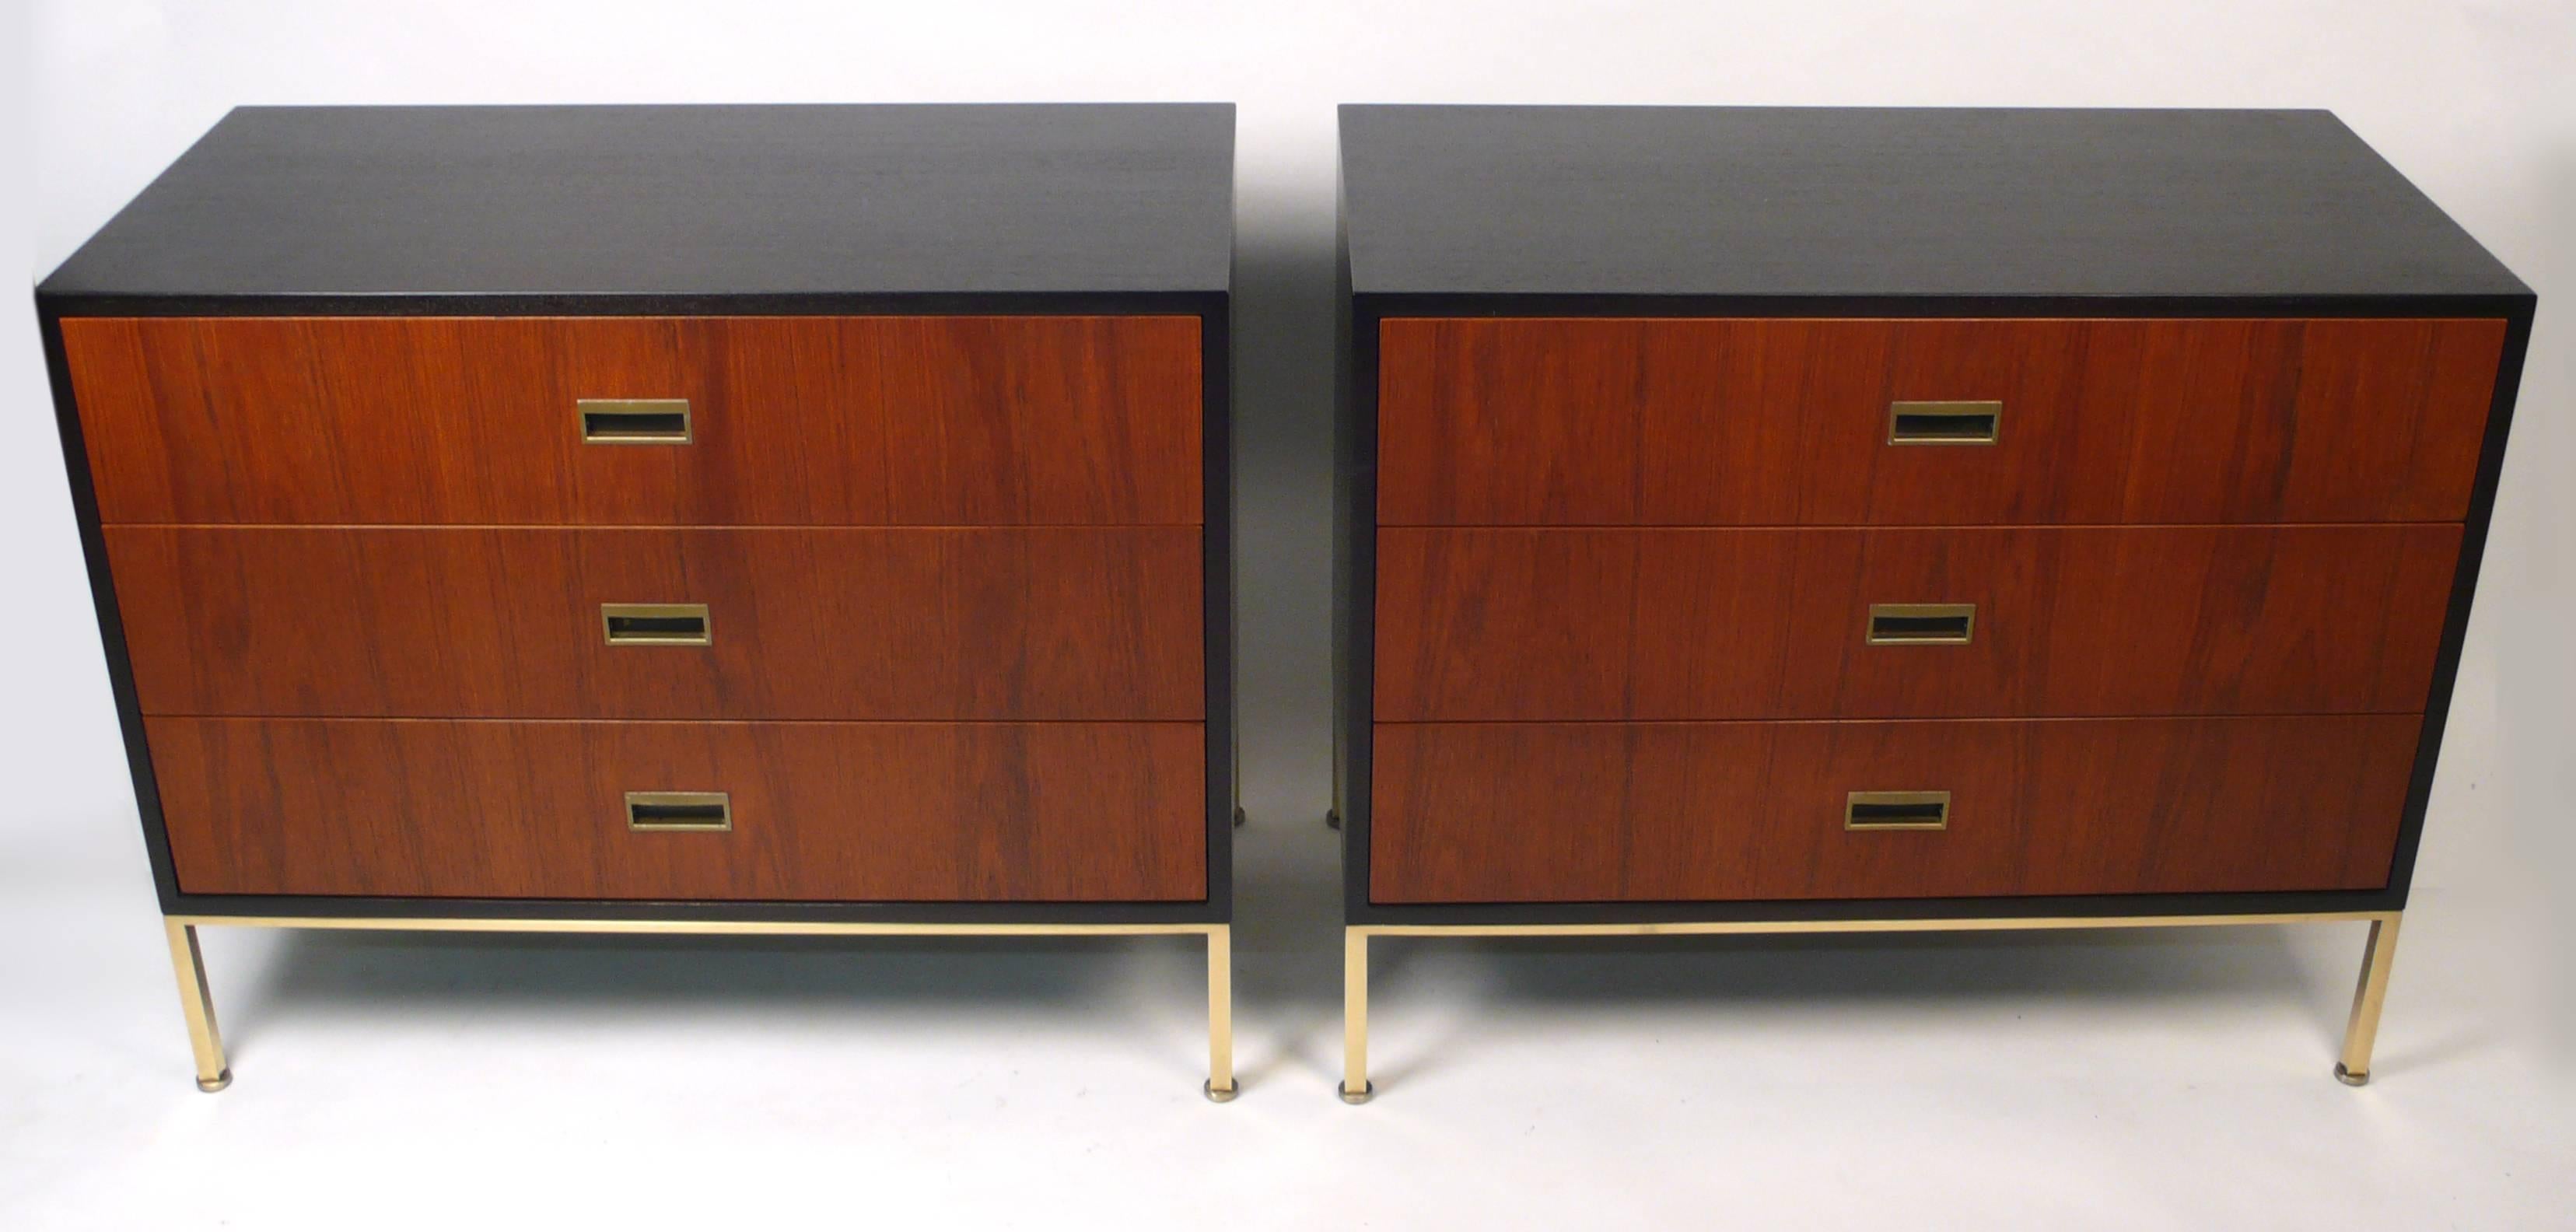 Matching pair of three-drawer chests by Harvey Probber. Priced per item.